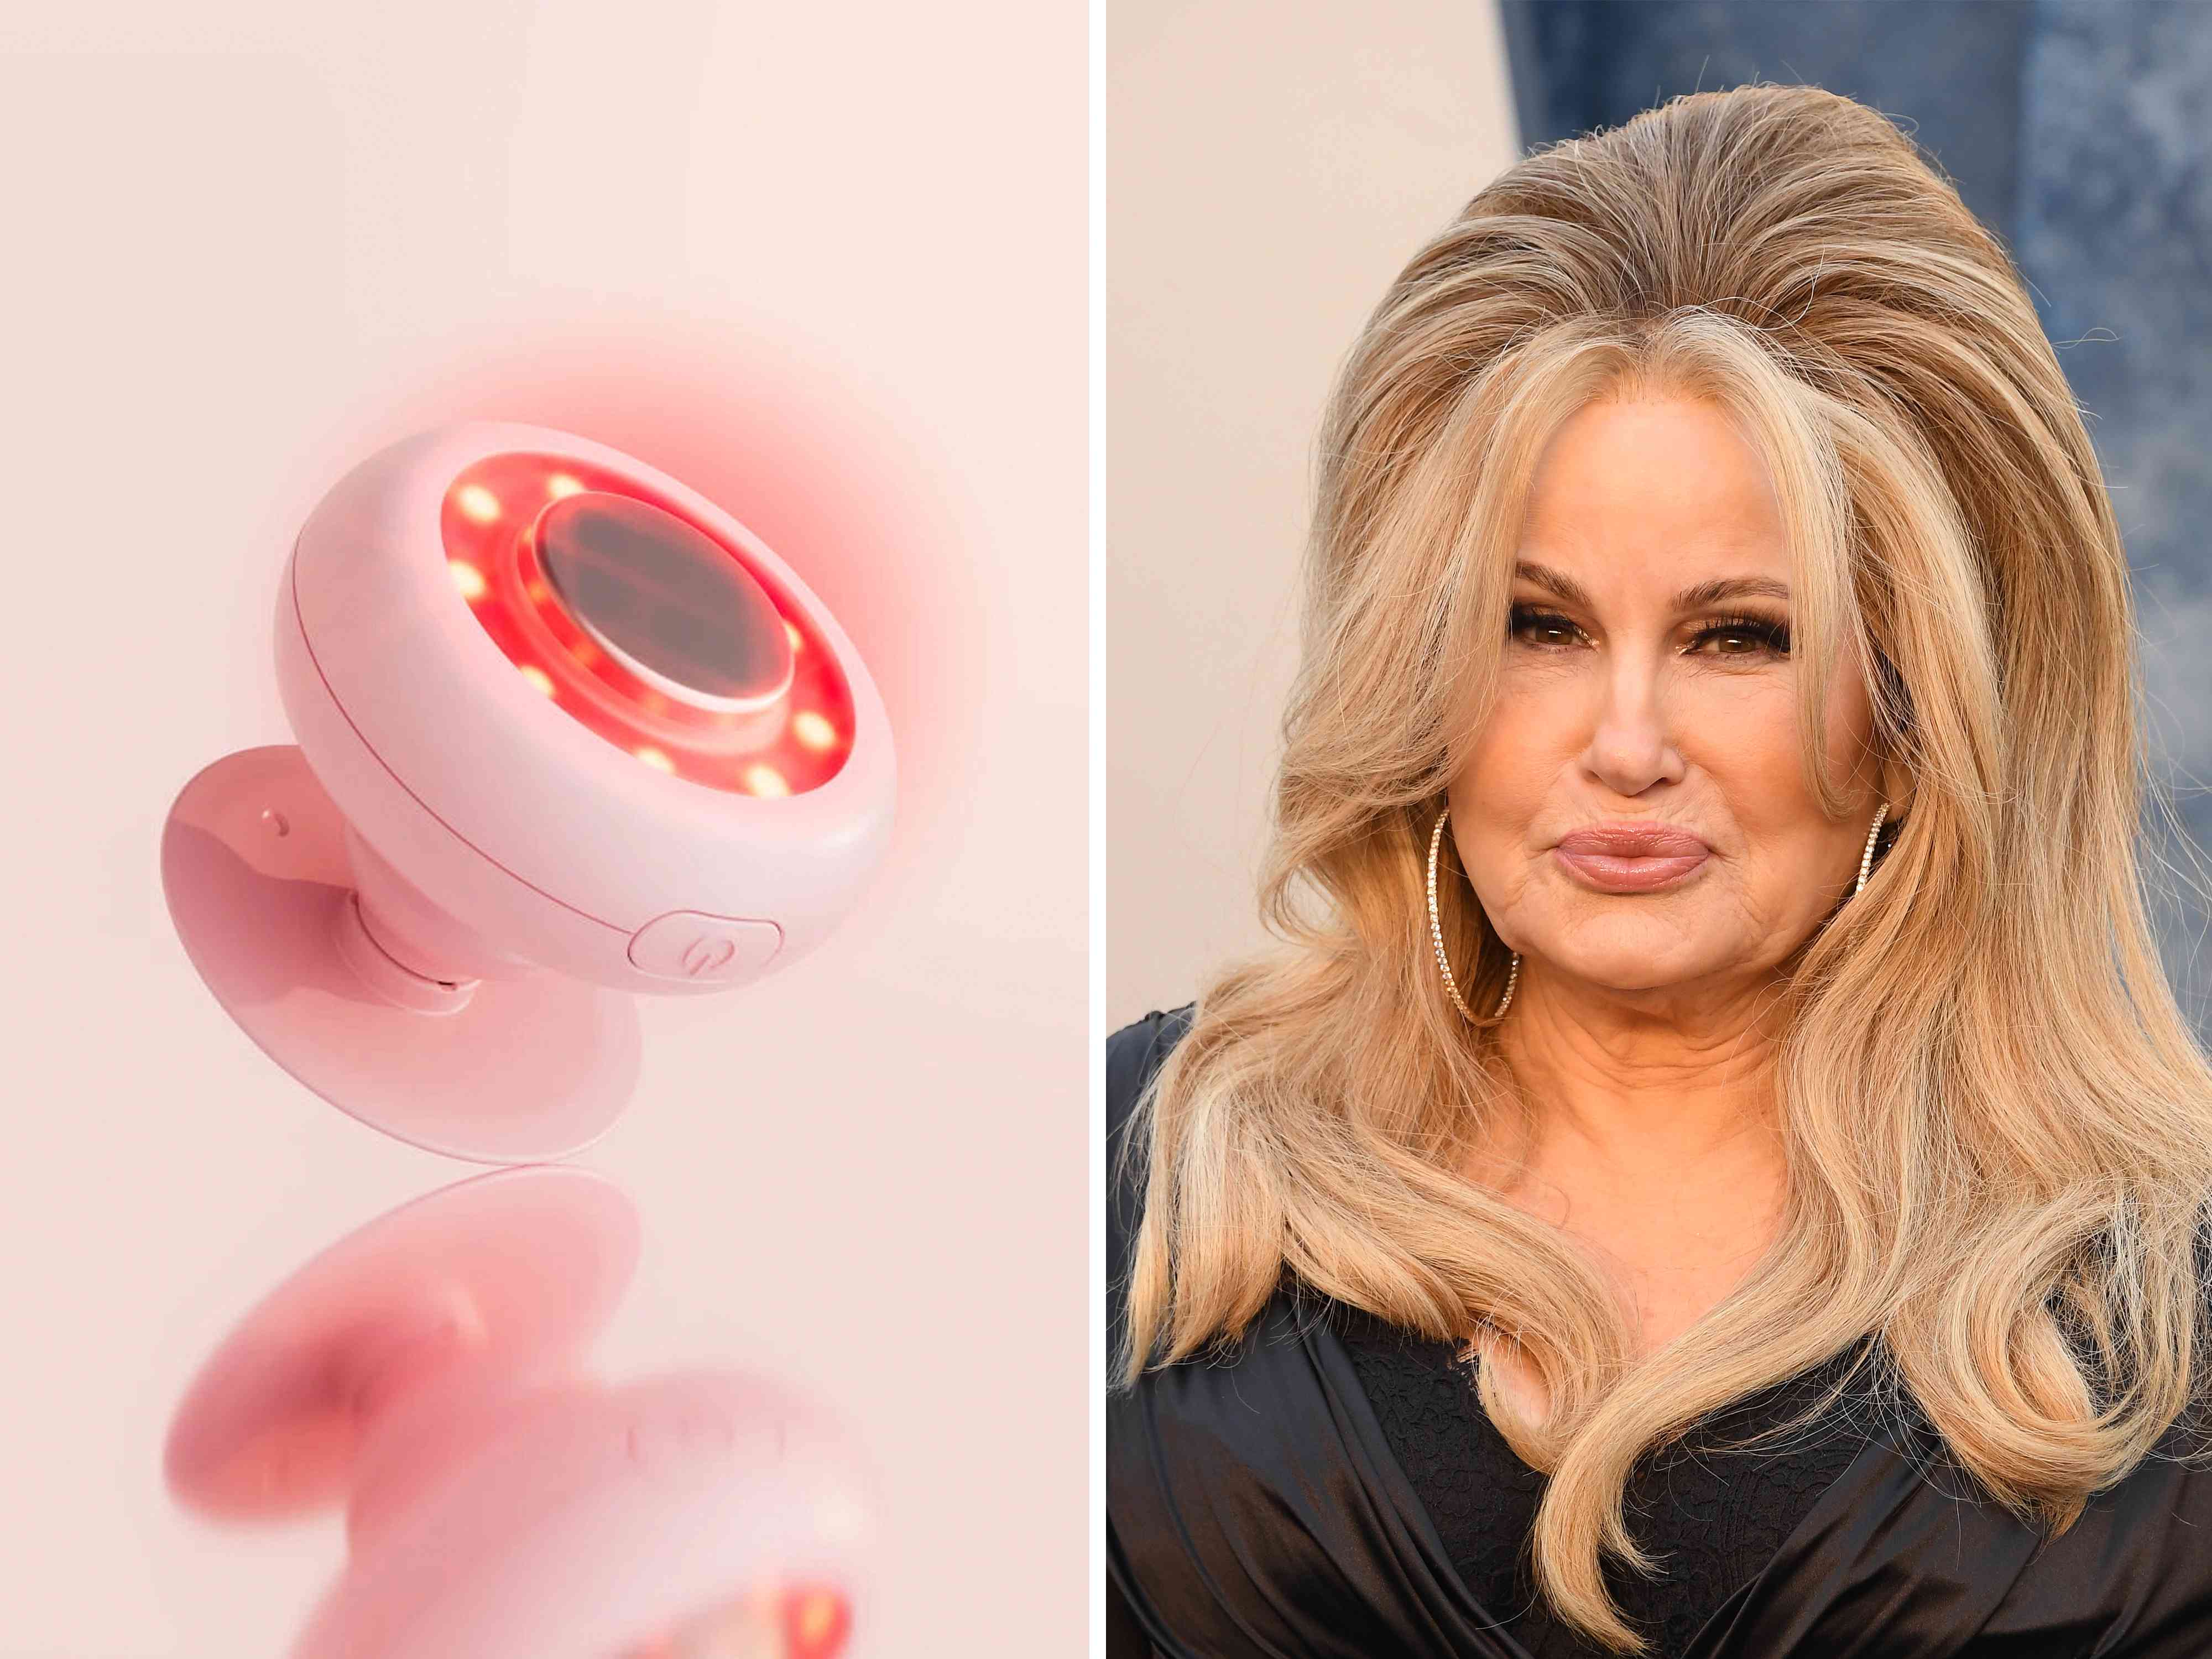 Shoppers Say This Wrinkle-Smoothing Tool From a Jennifer Coolidge-Used Brand "Works Miracles"